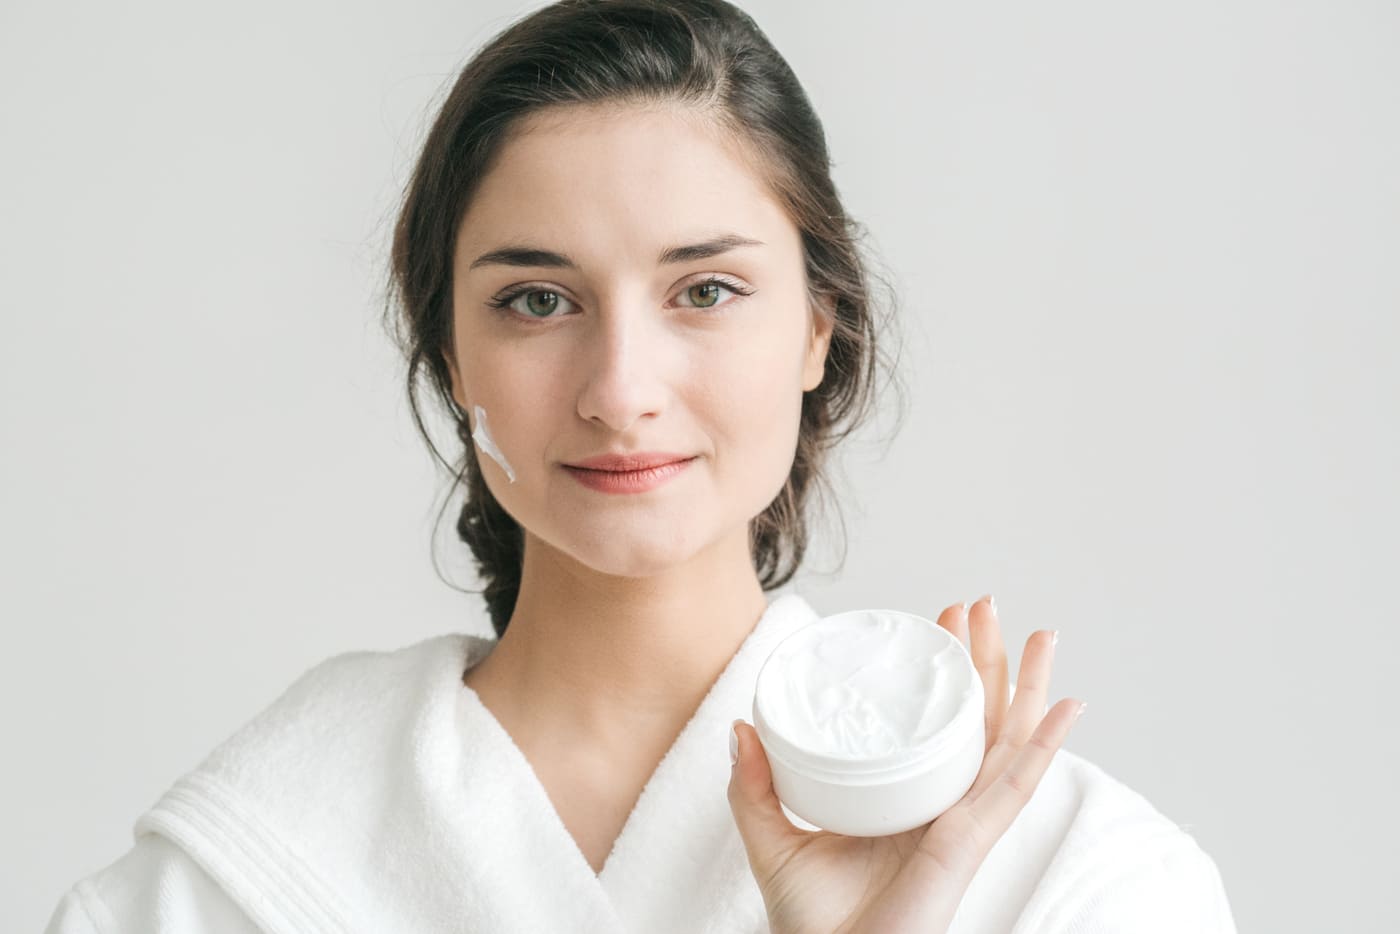 Do anti-aging creams really work? If yes, how does anti-aging, wrinkle and skin repair cream work?